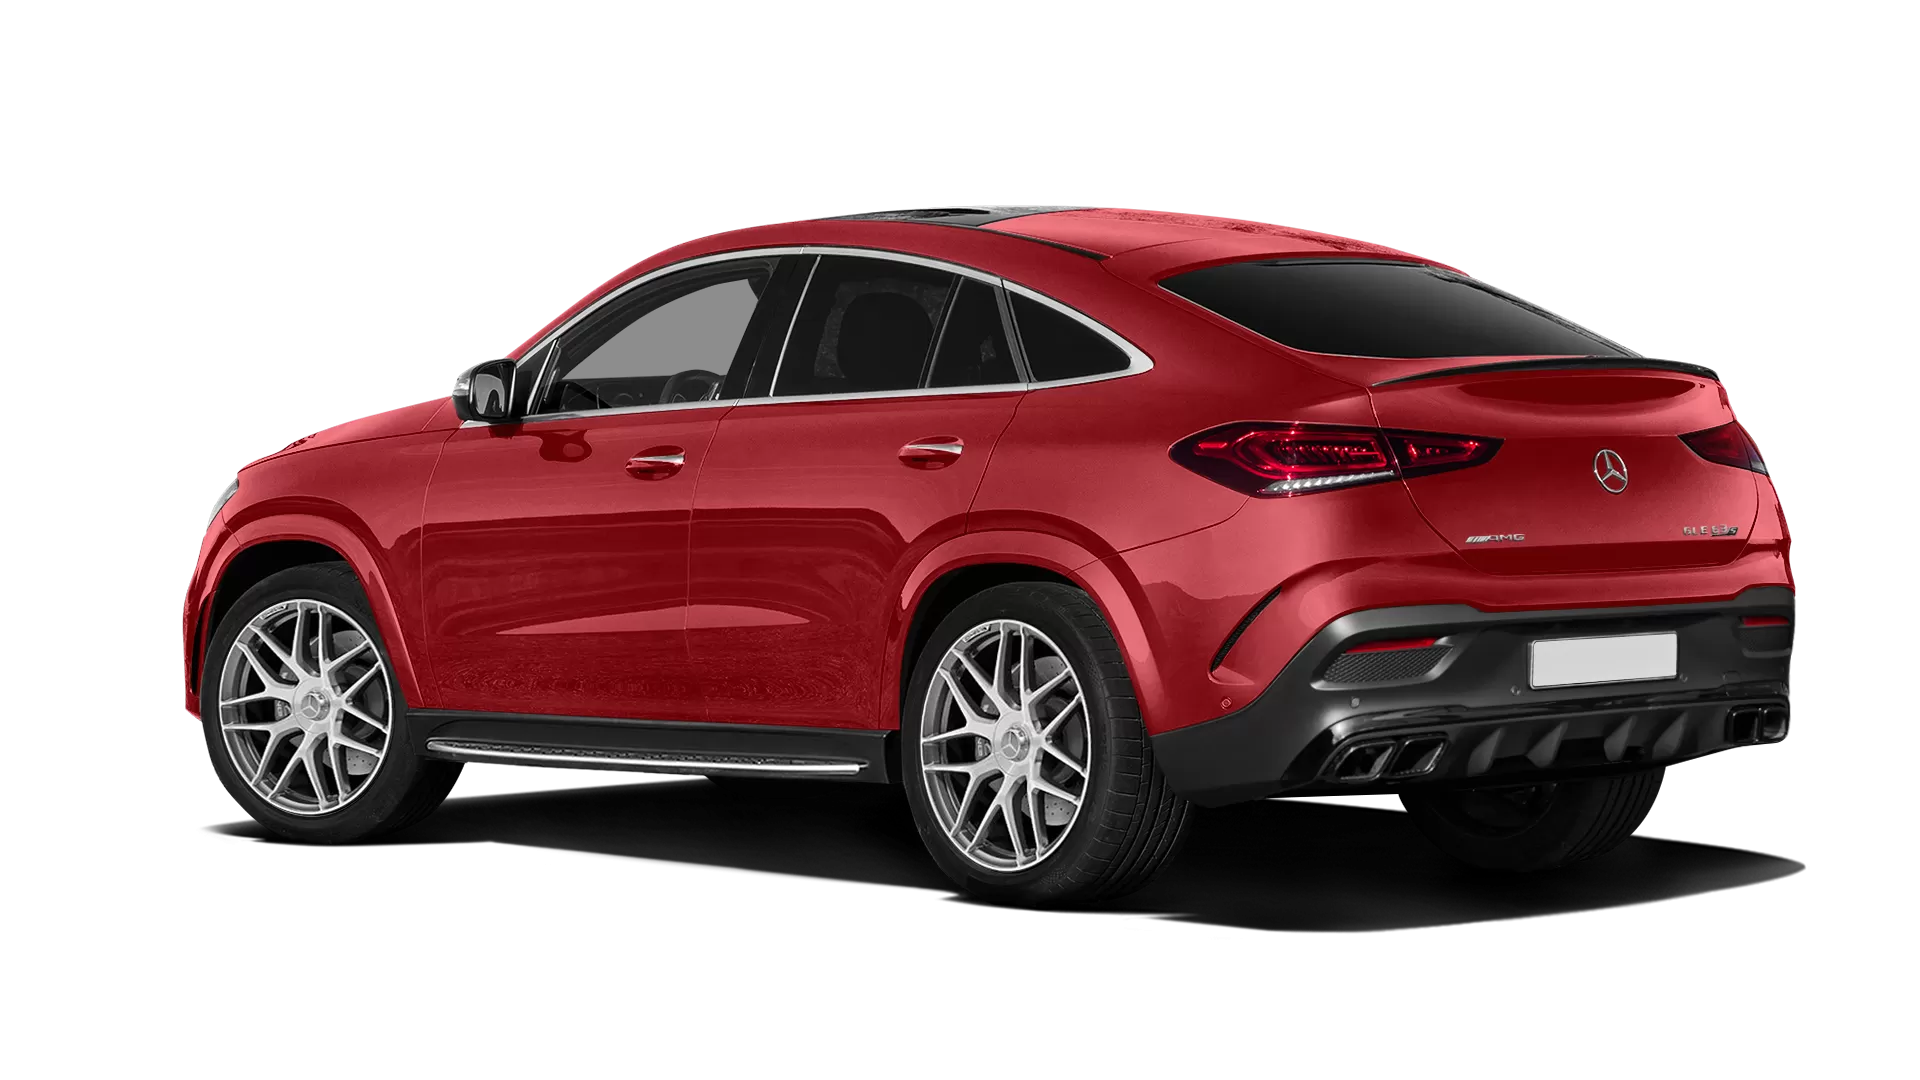 Mercedes GLE Coupe AMG 63 C167 stock rear view in Hyacinthe Red color